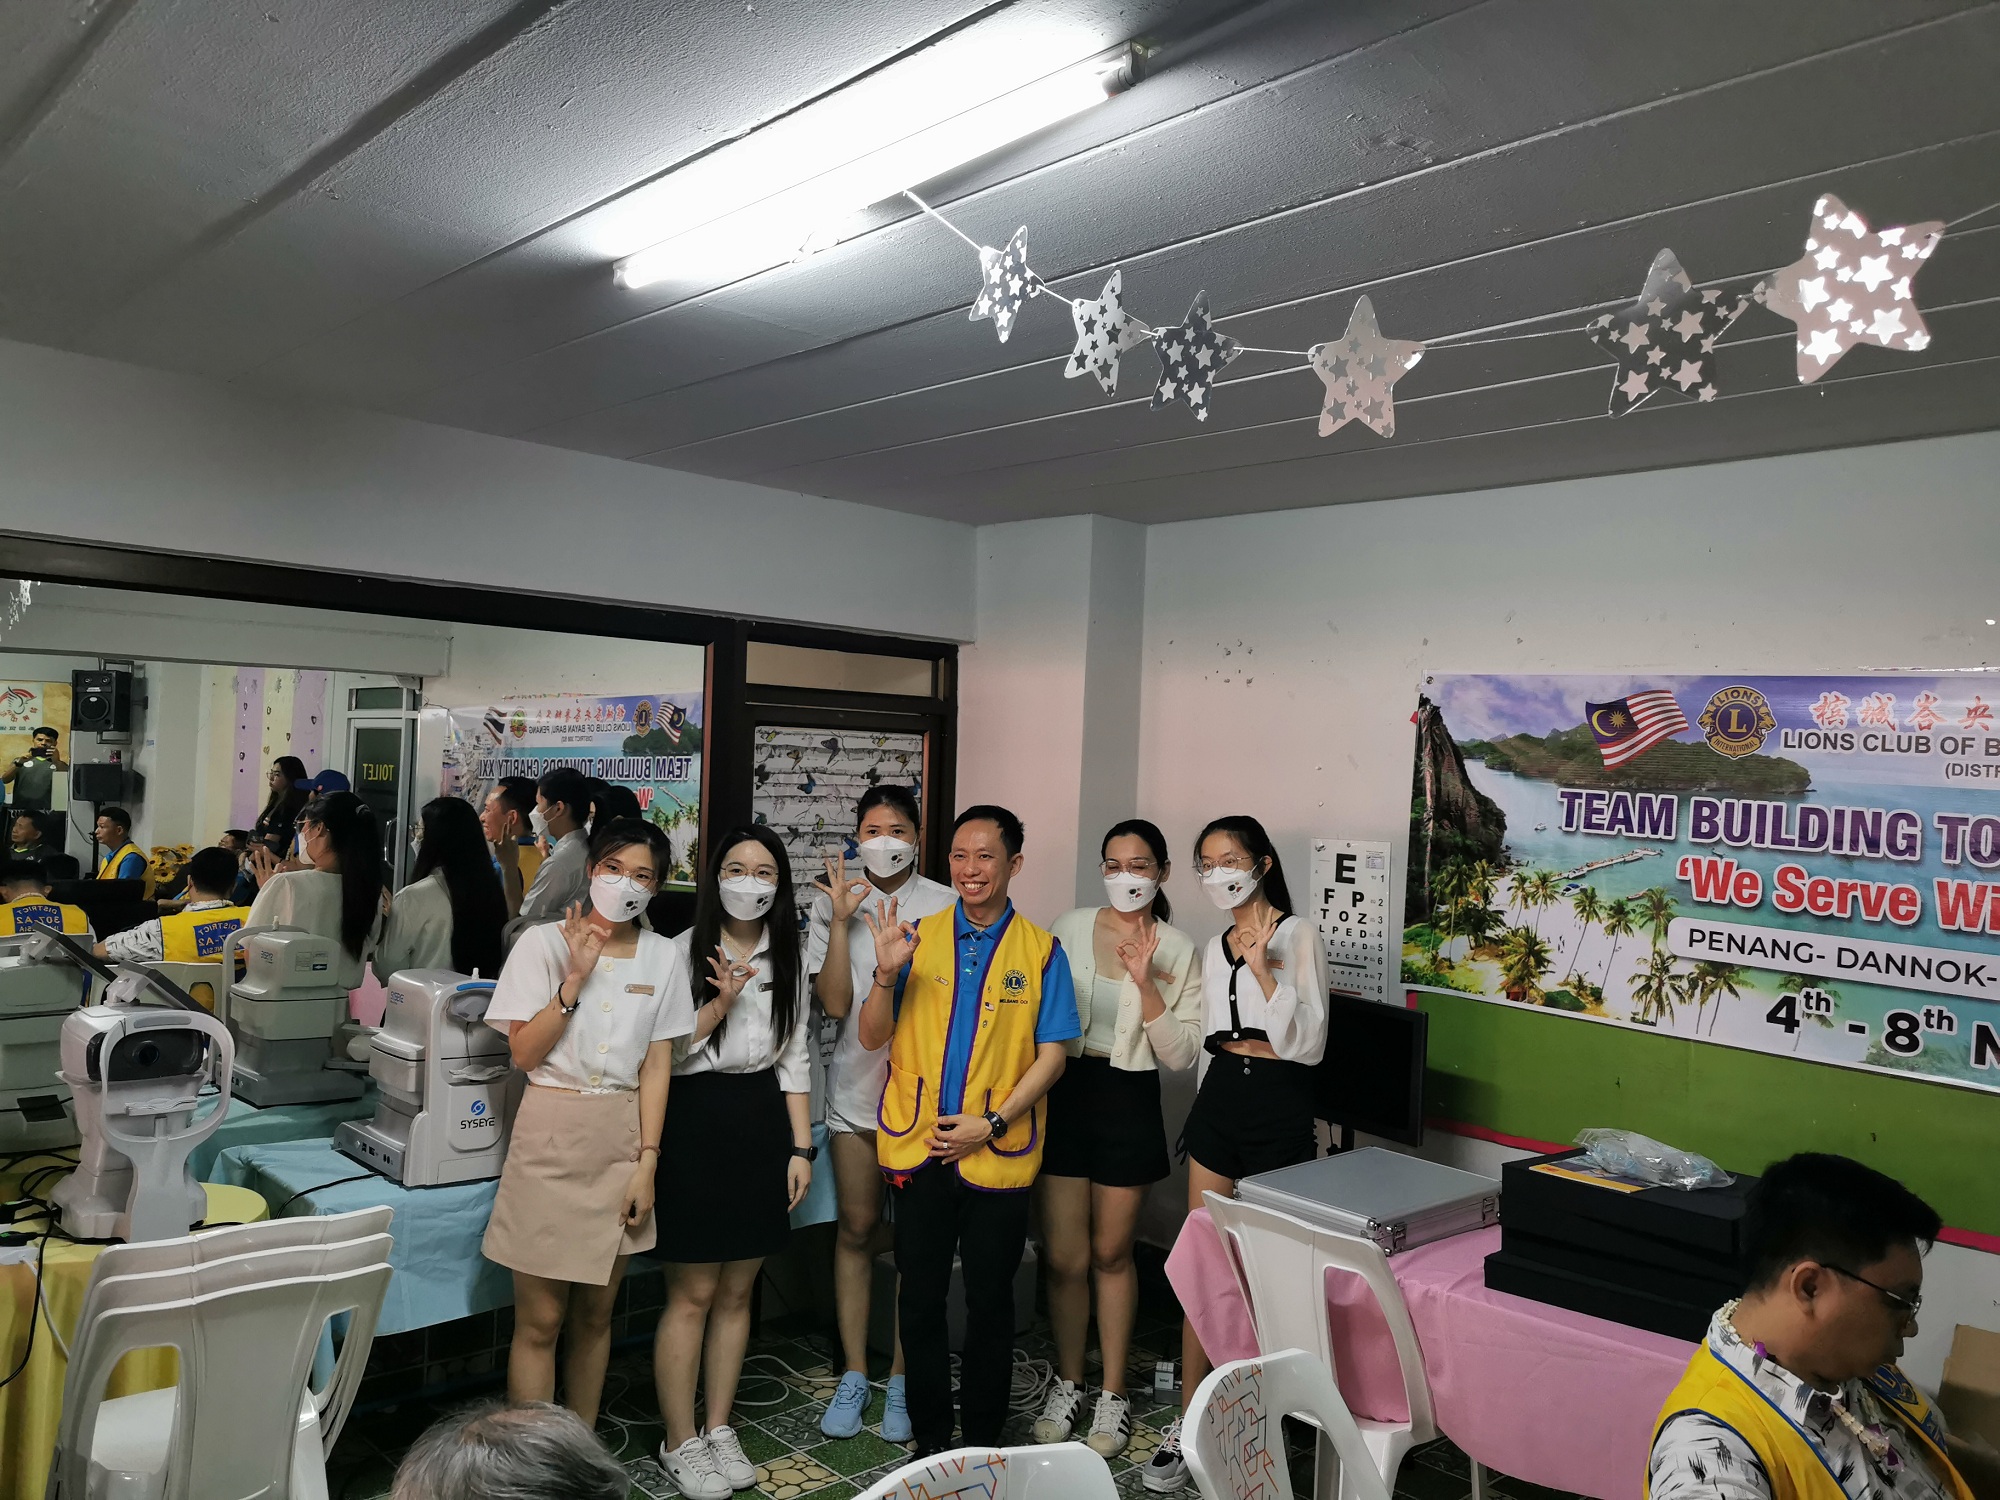 Huang Yuliang (Melbans) also sent a professional eye examination team with excellent eye examination equipment to examine the eyes of the children and villagers on the scene.